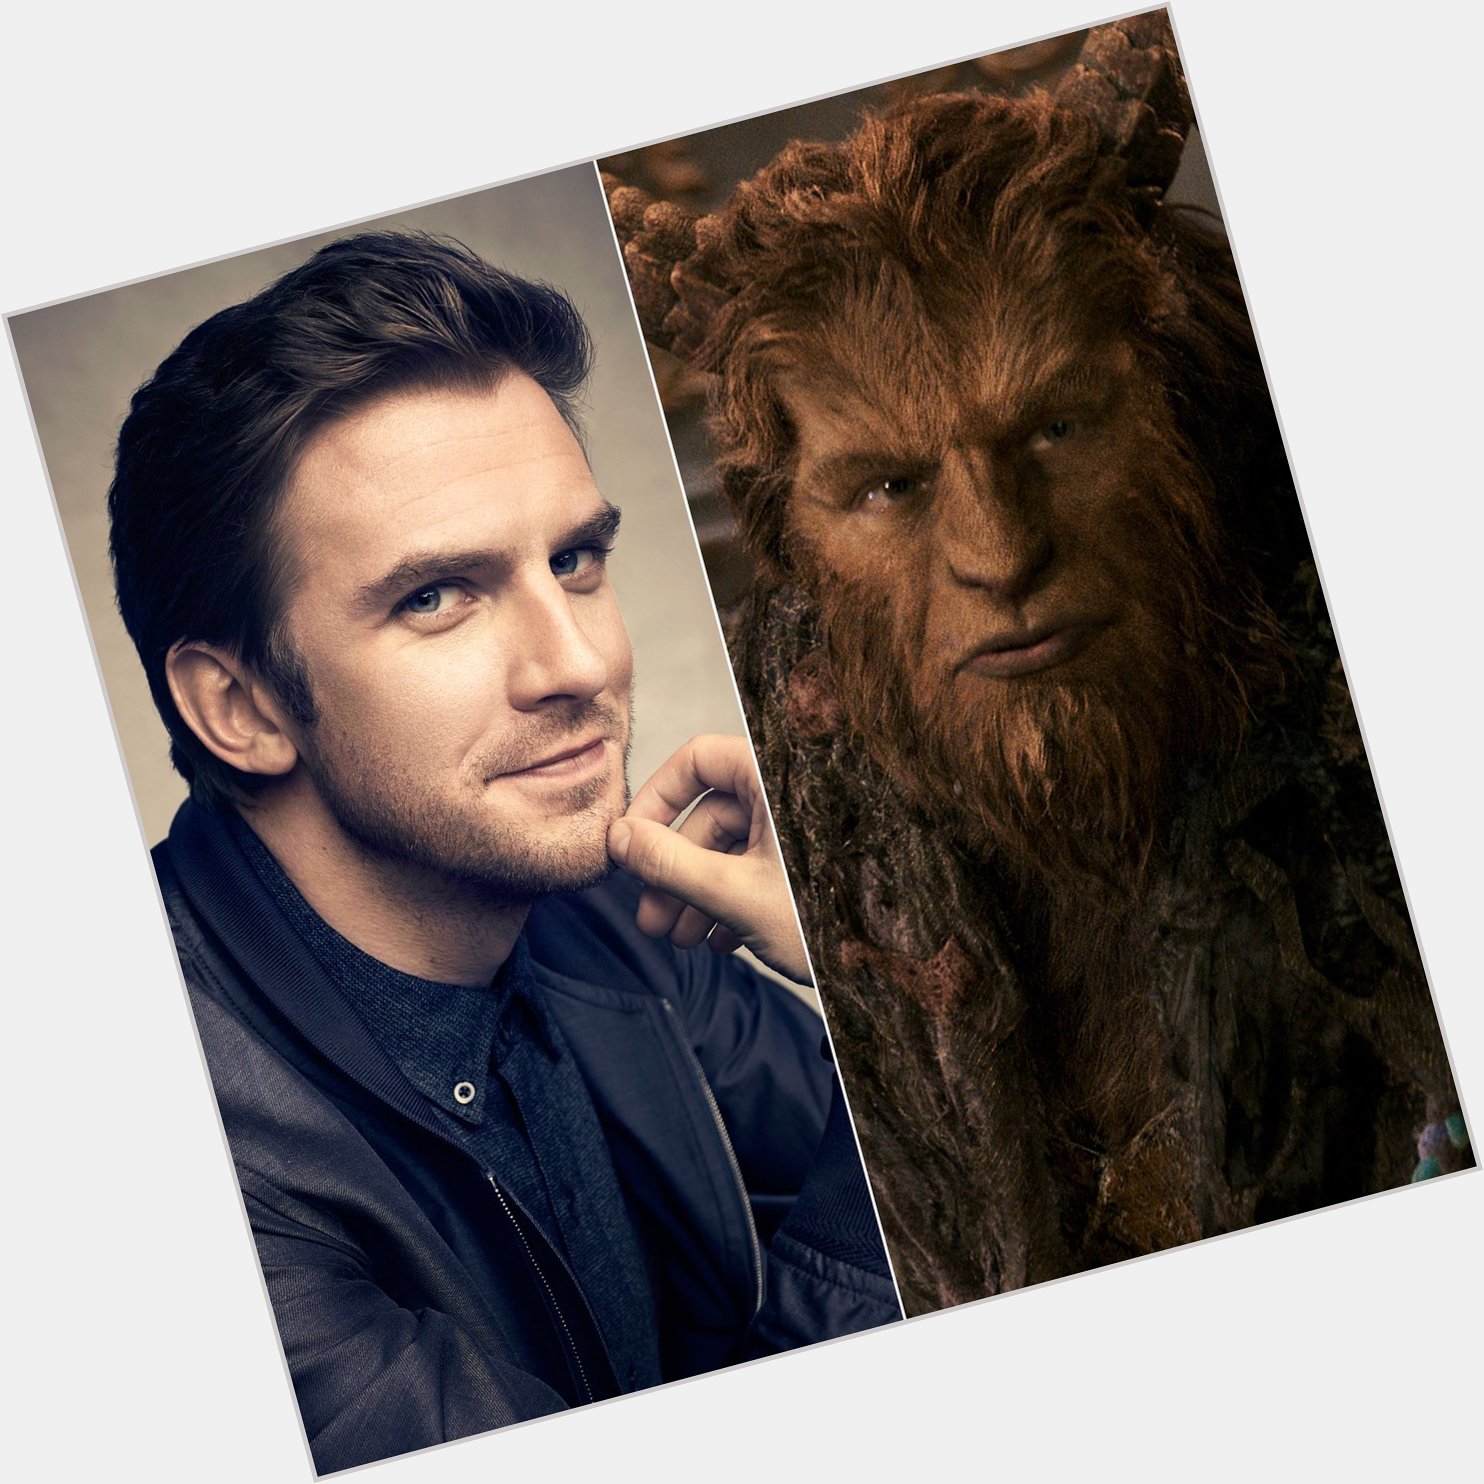 Happy 36th Birthday to Dan Stevens! The actor who played the Beast in Beauty and the Beast (2017). 